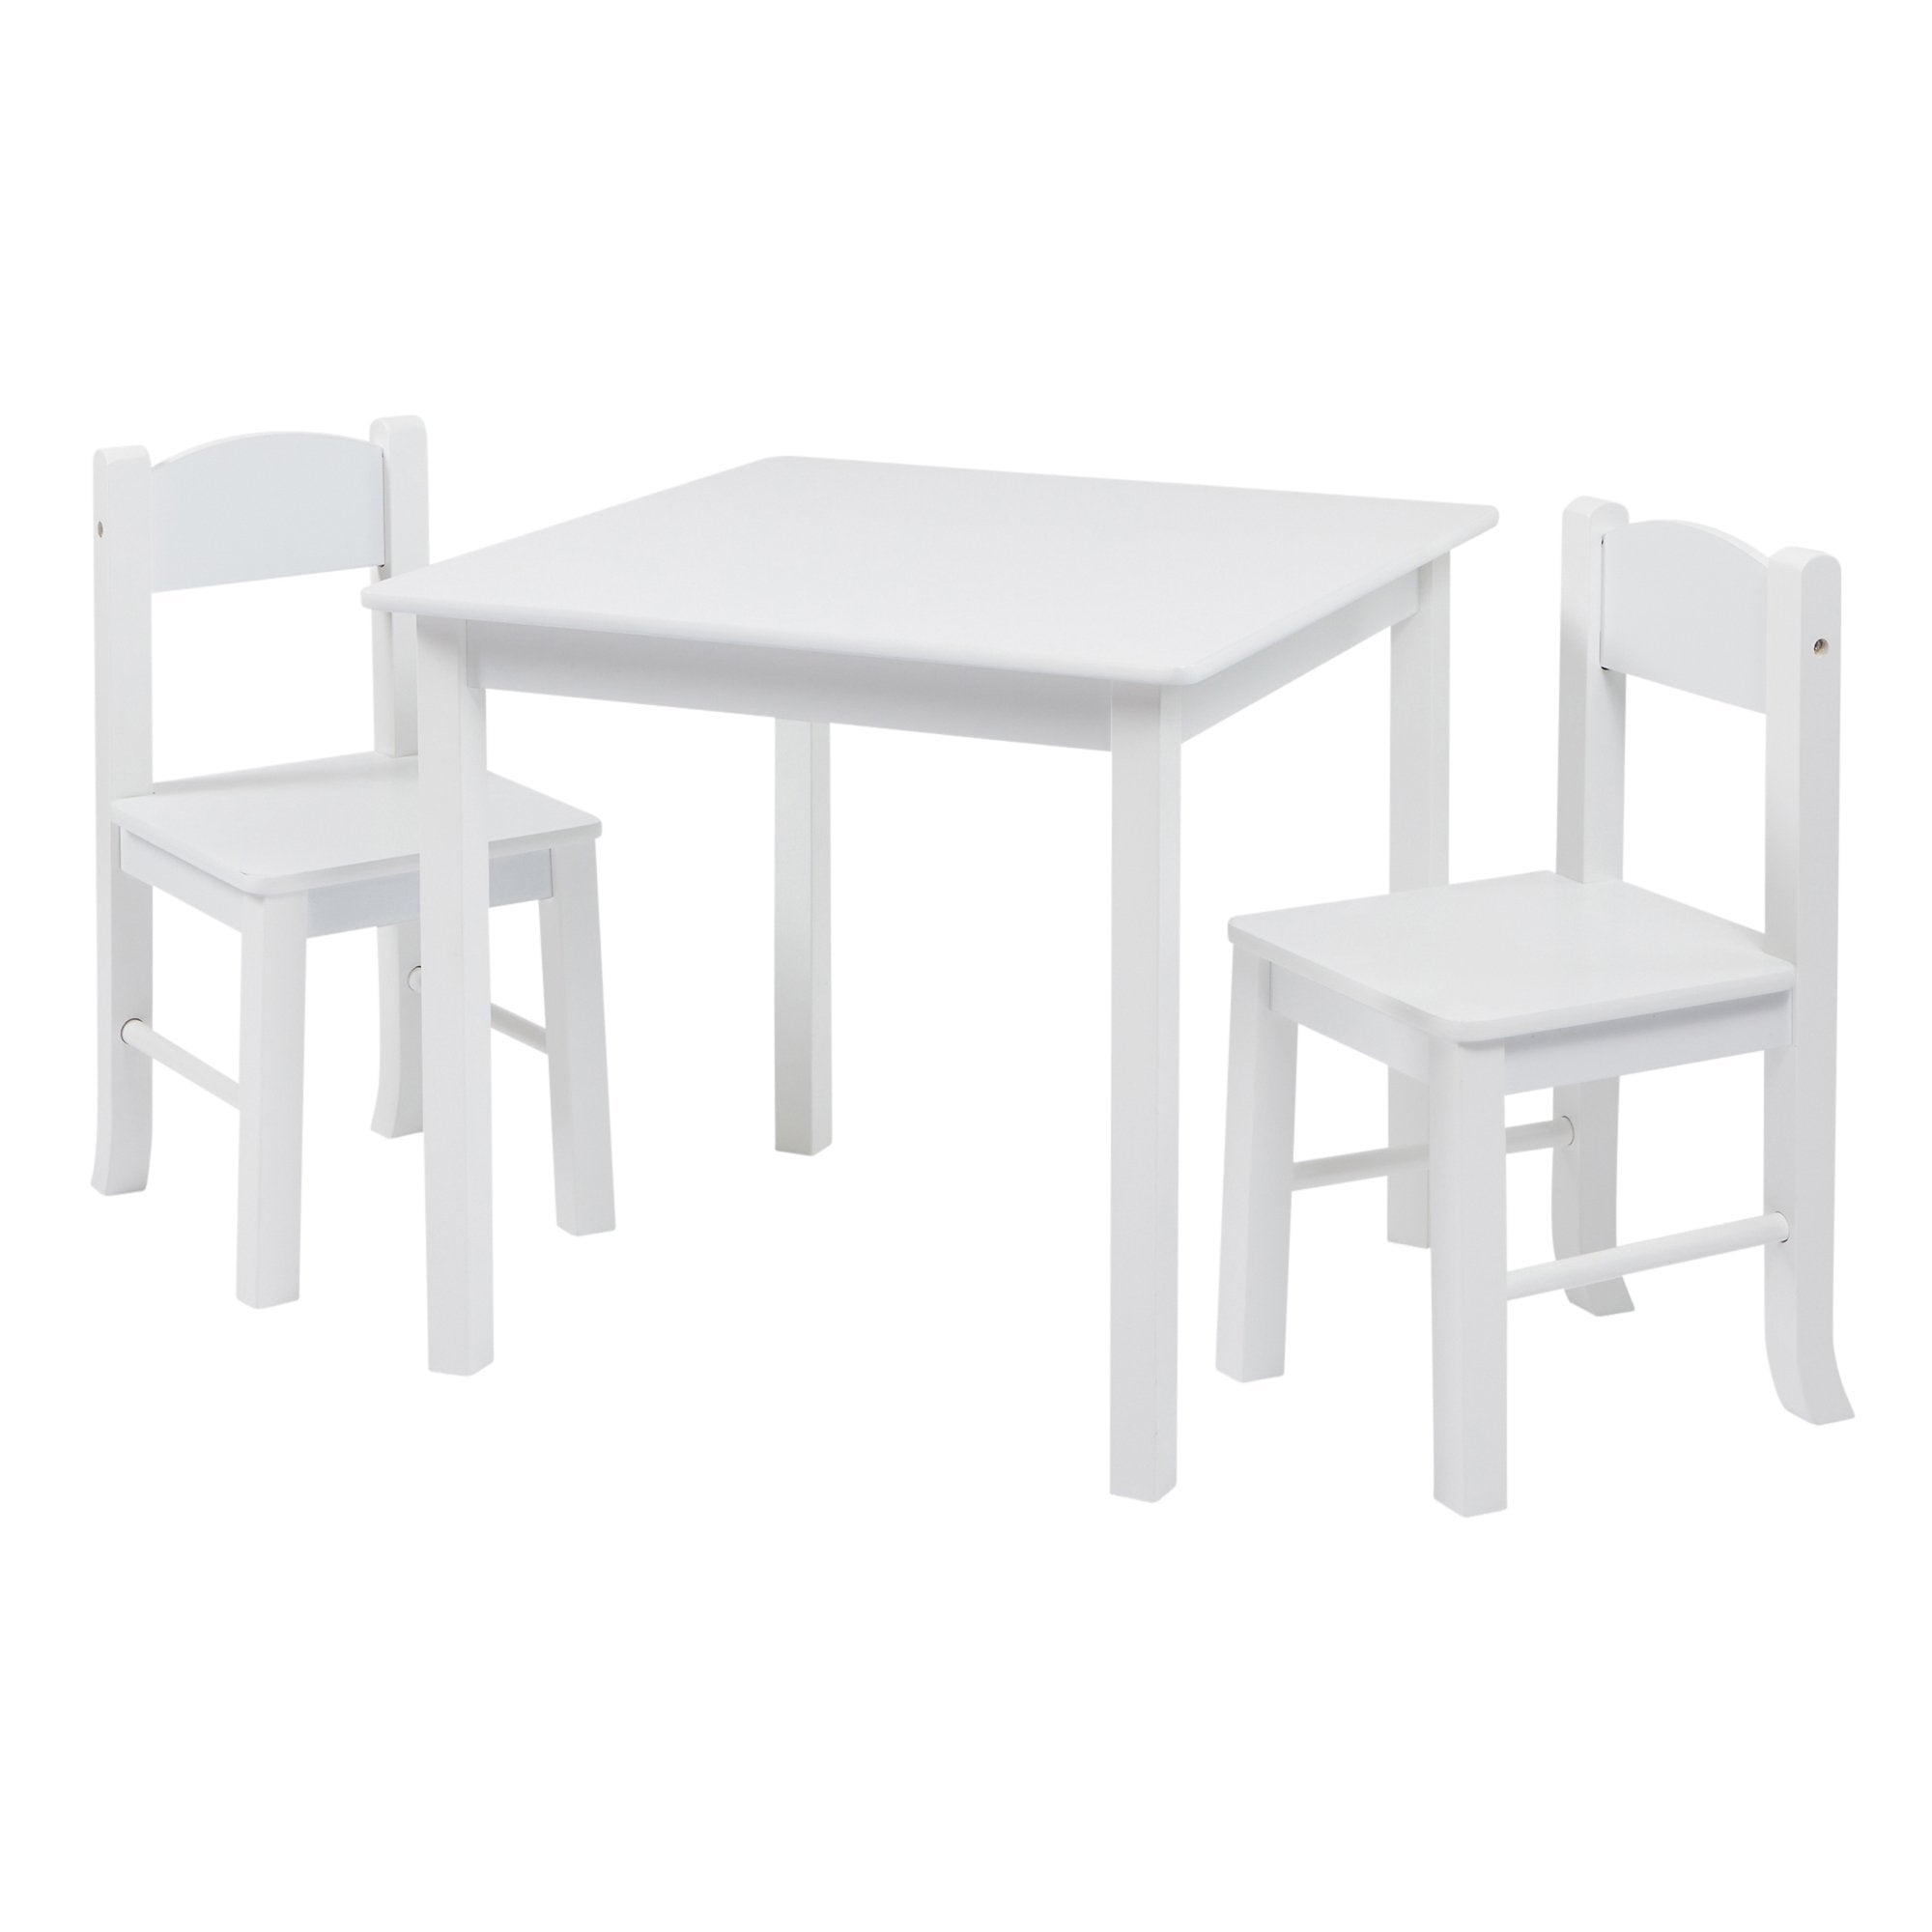 White Solid Wooden Table & Chairs - Liberty House Toys - Junior Bambinos